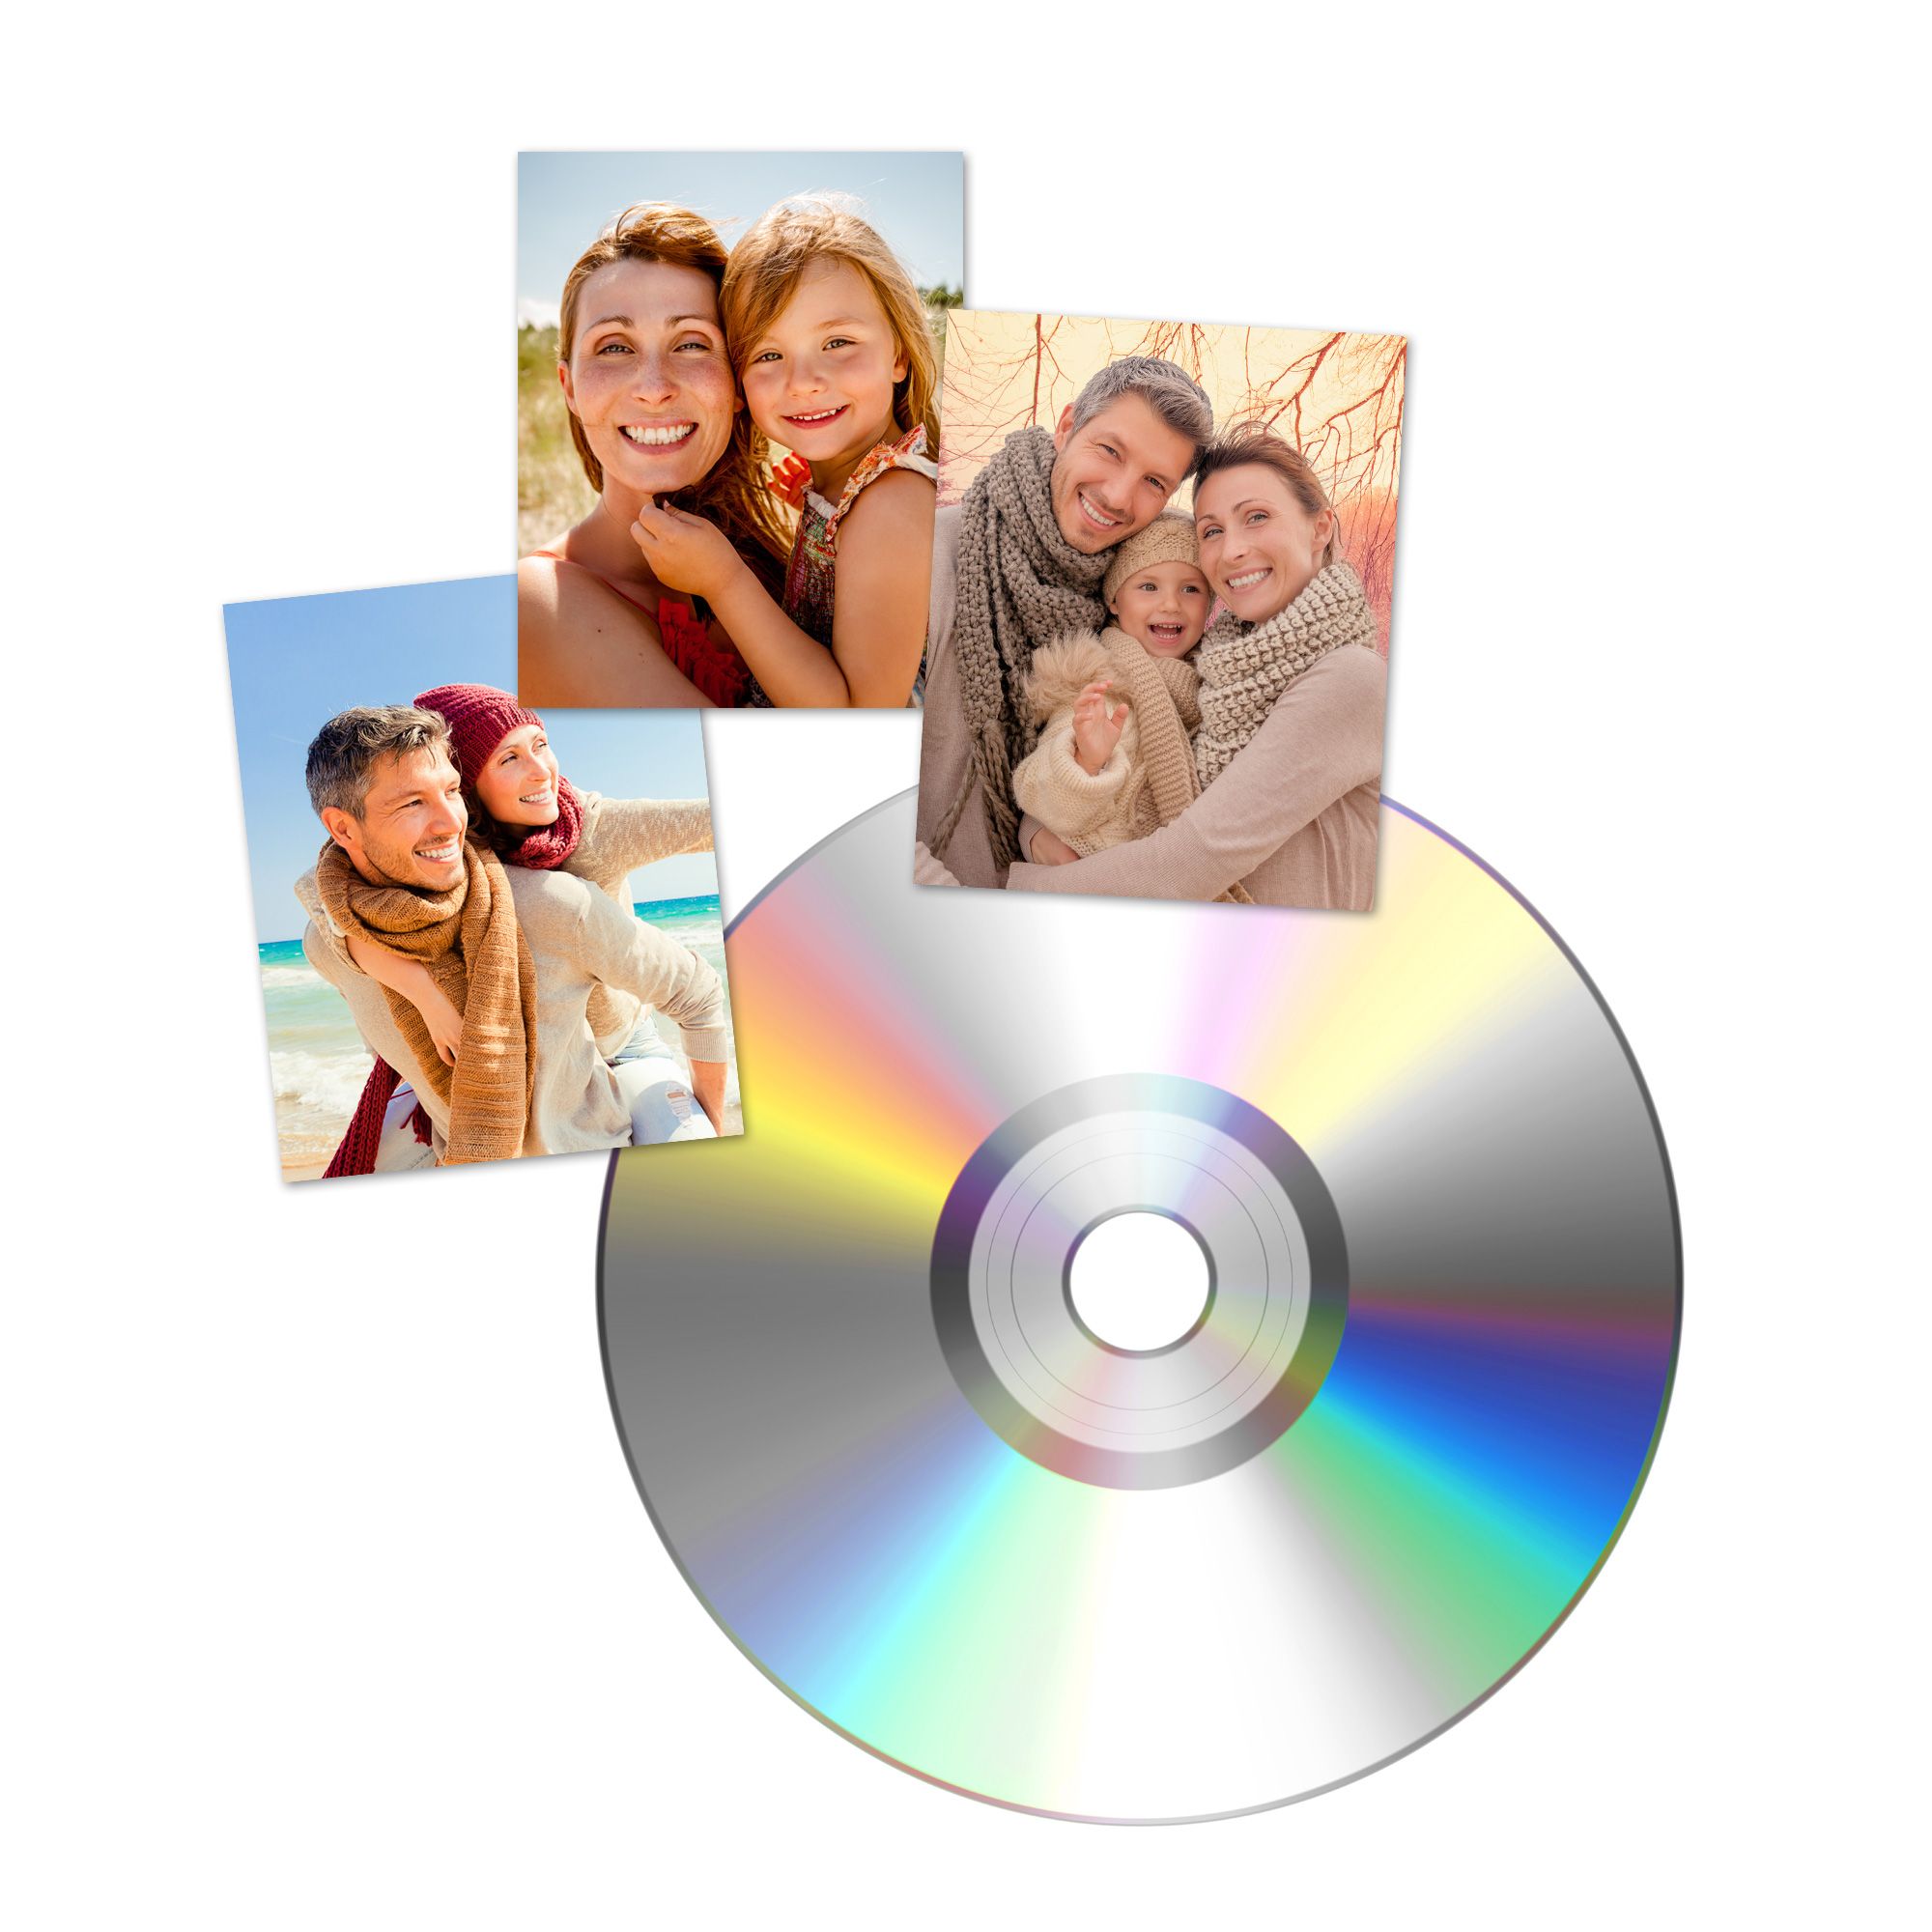 Archive Photo CD | Images on Disk | Back Up Pictures | EZPrints